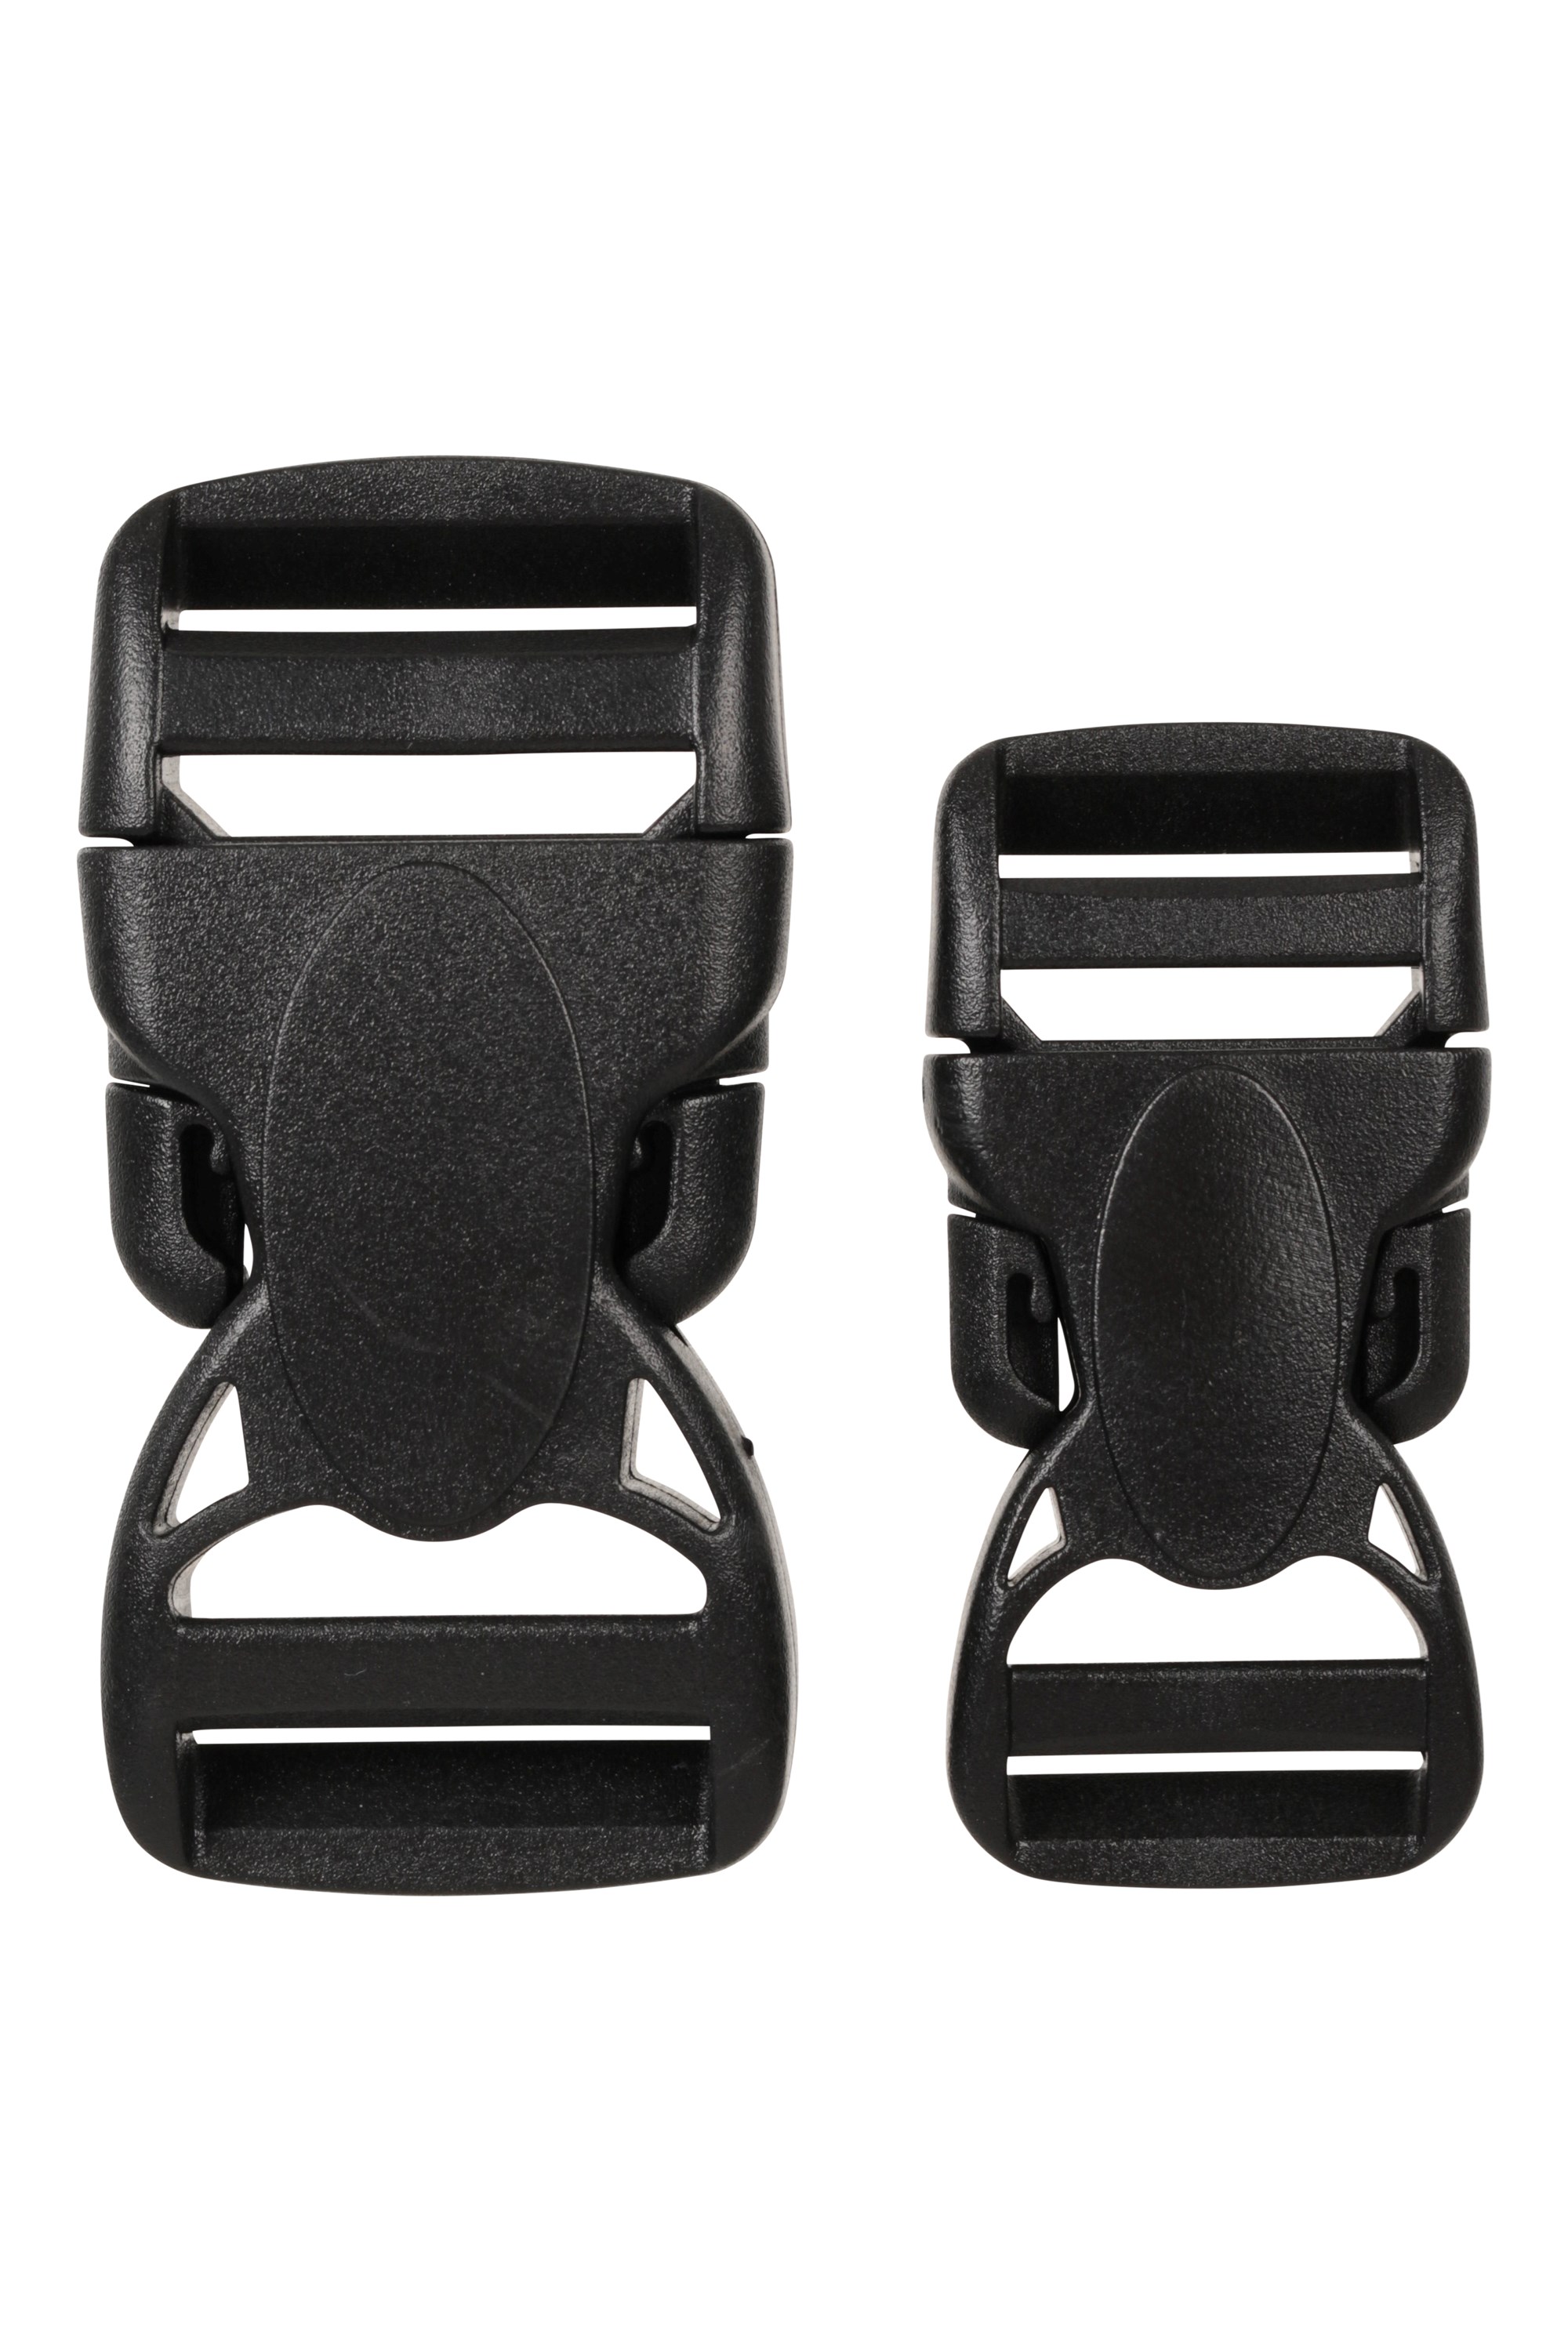 Spare Quick Release Buckles - ONE